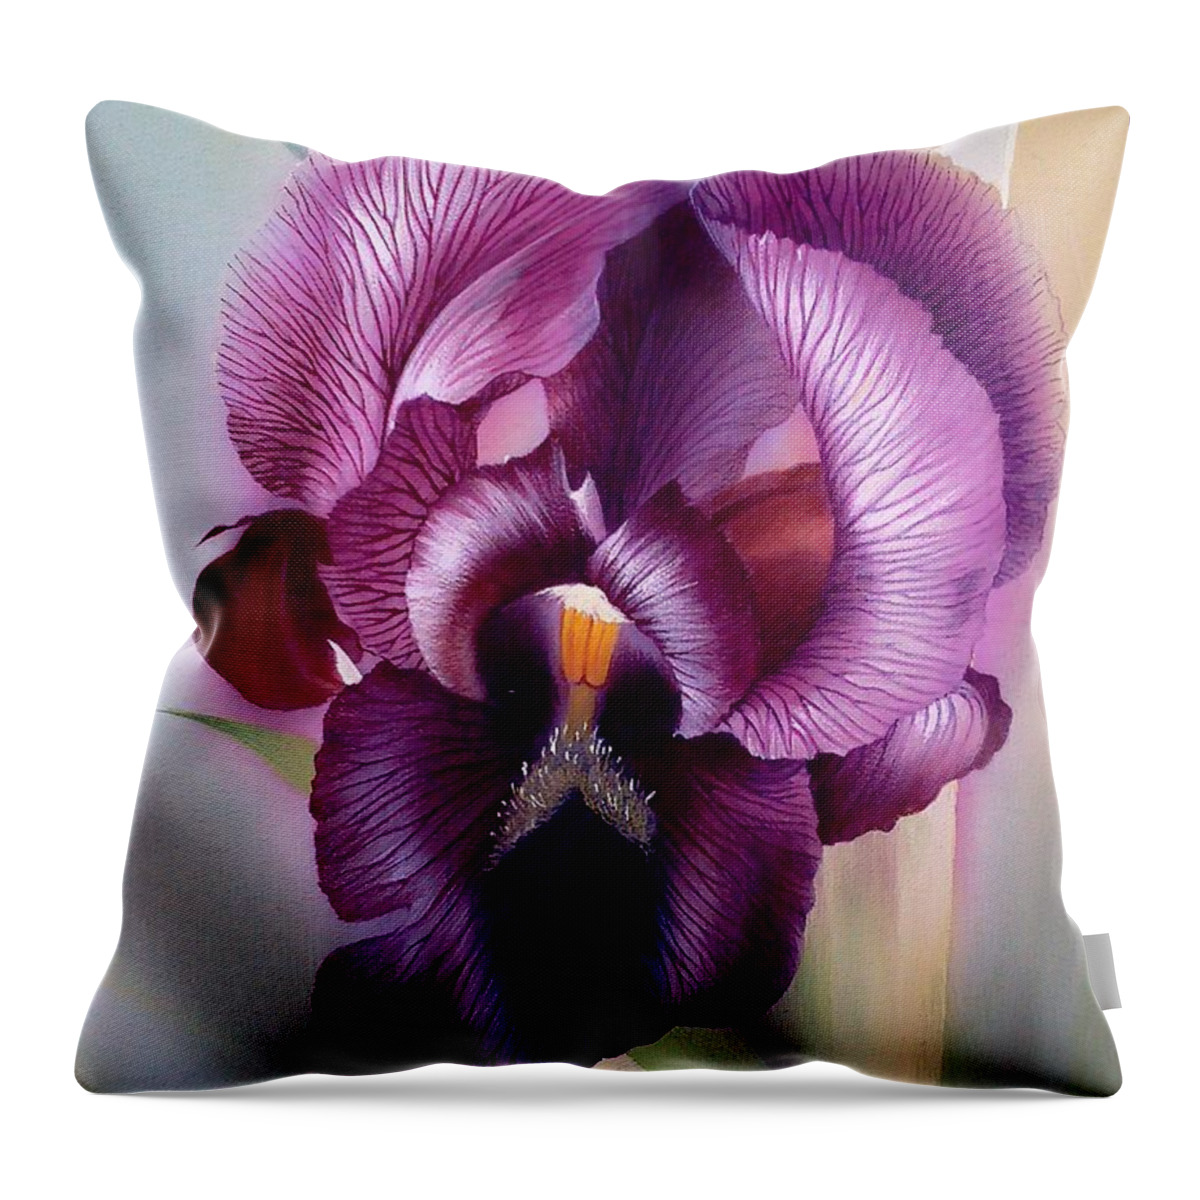 Russian Artists New Wave Throw Pillow featuring the painting Purple Iris Head 1 by Alina Oseeva